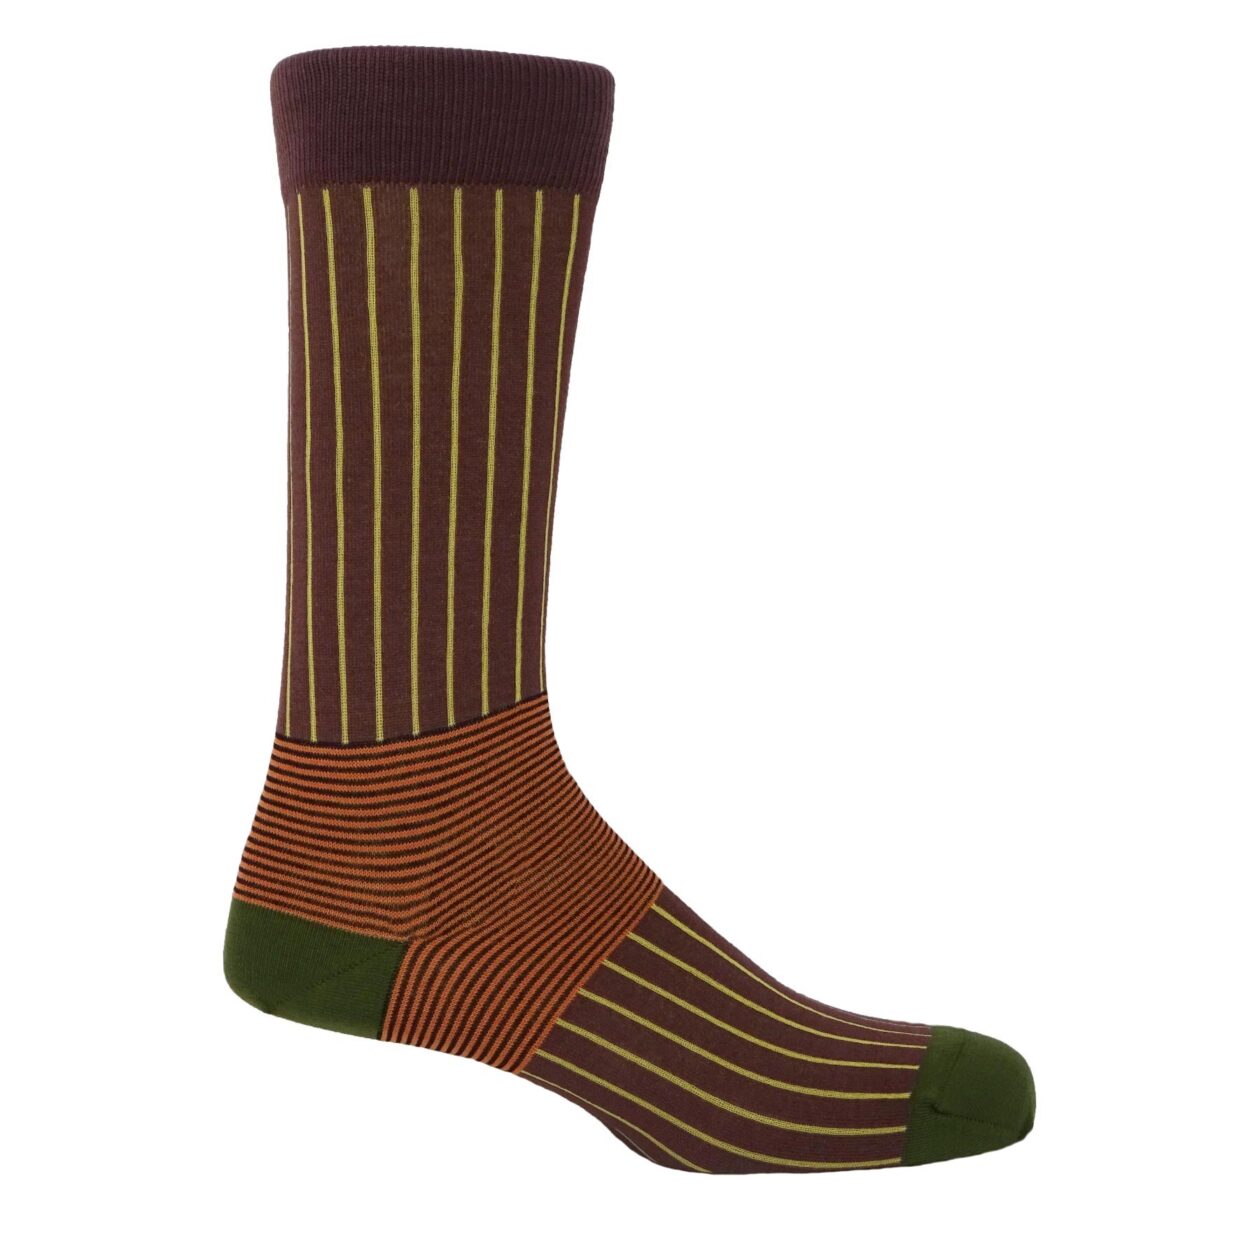 Peper Harow. Highest Quality socks. Traditional and Modern. Oxford Stripe